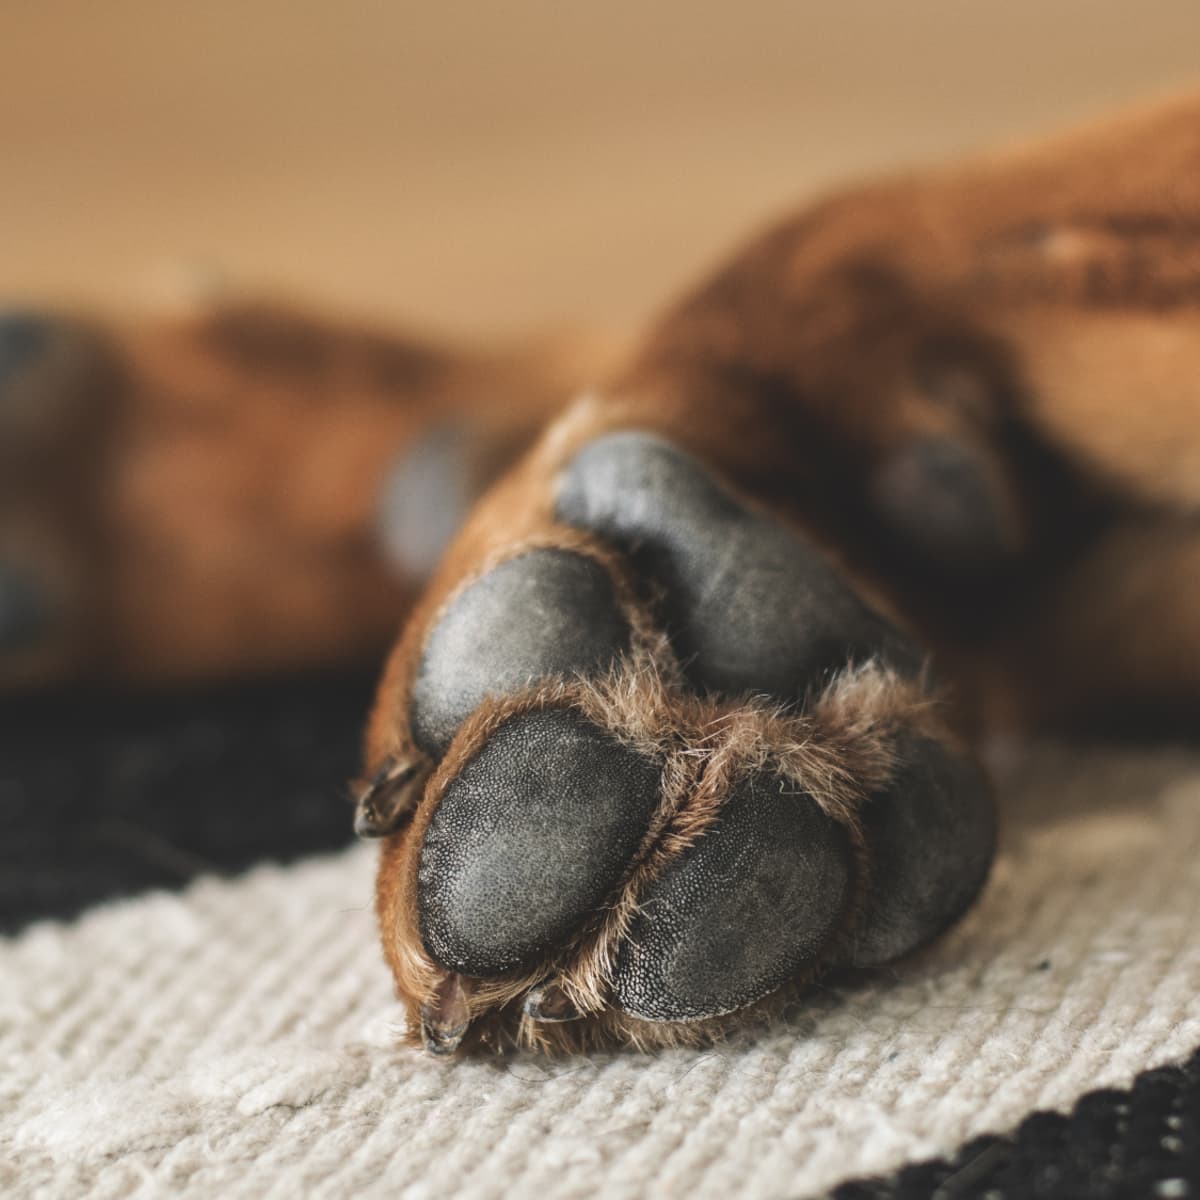 What's This Lump on My Dog's Paw? - PetHelpful